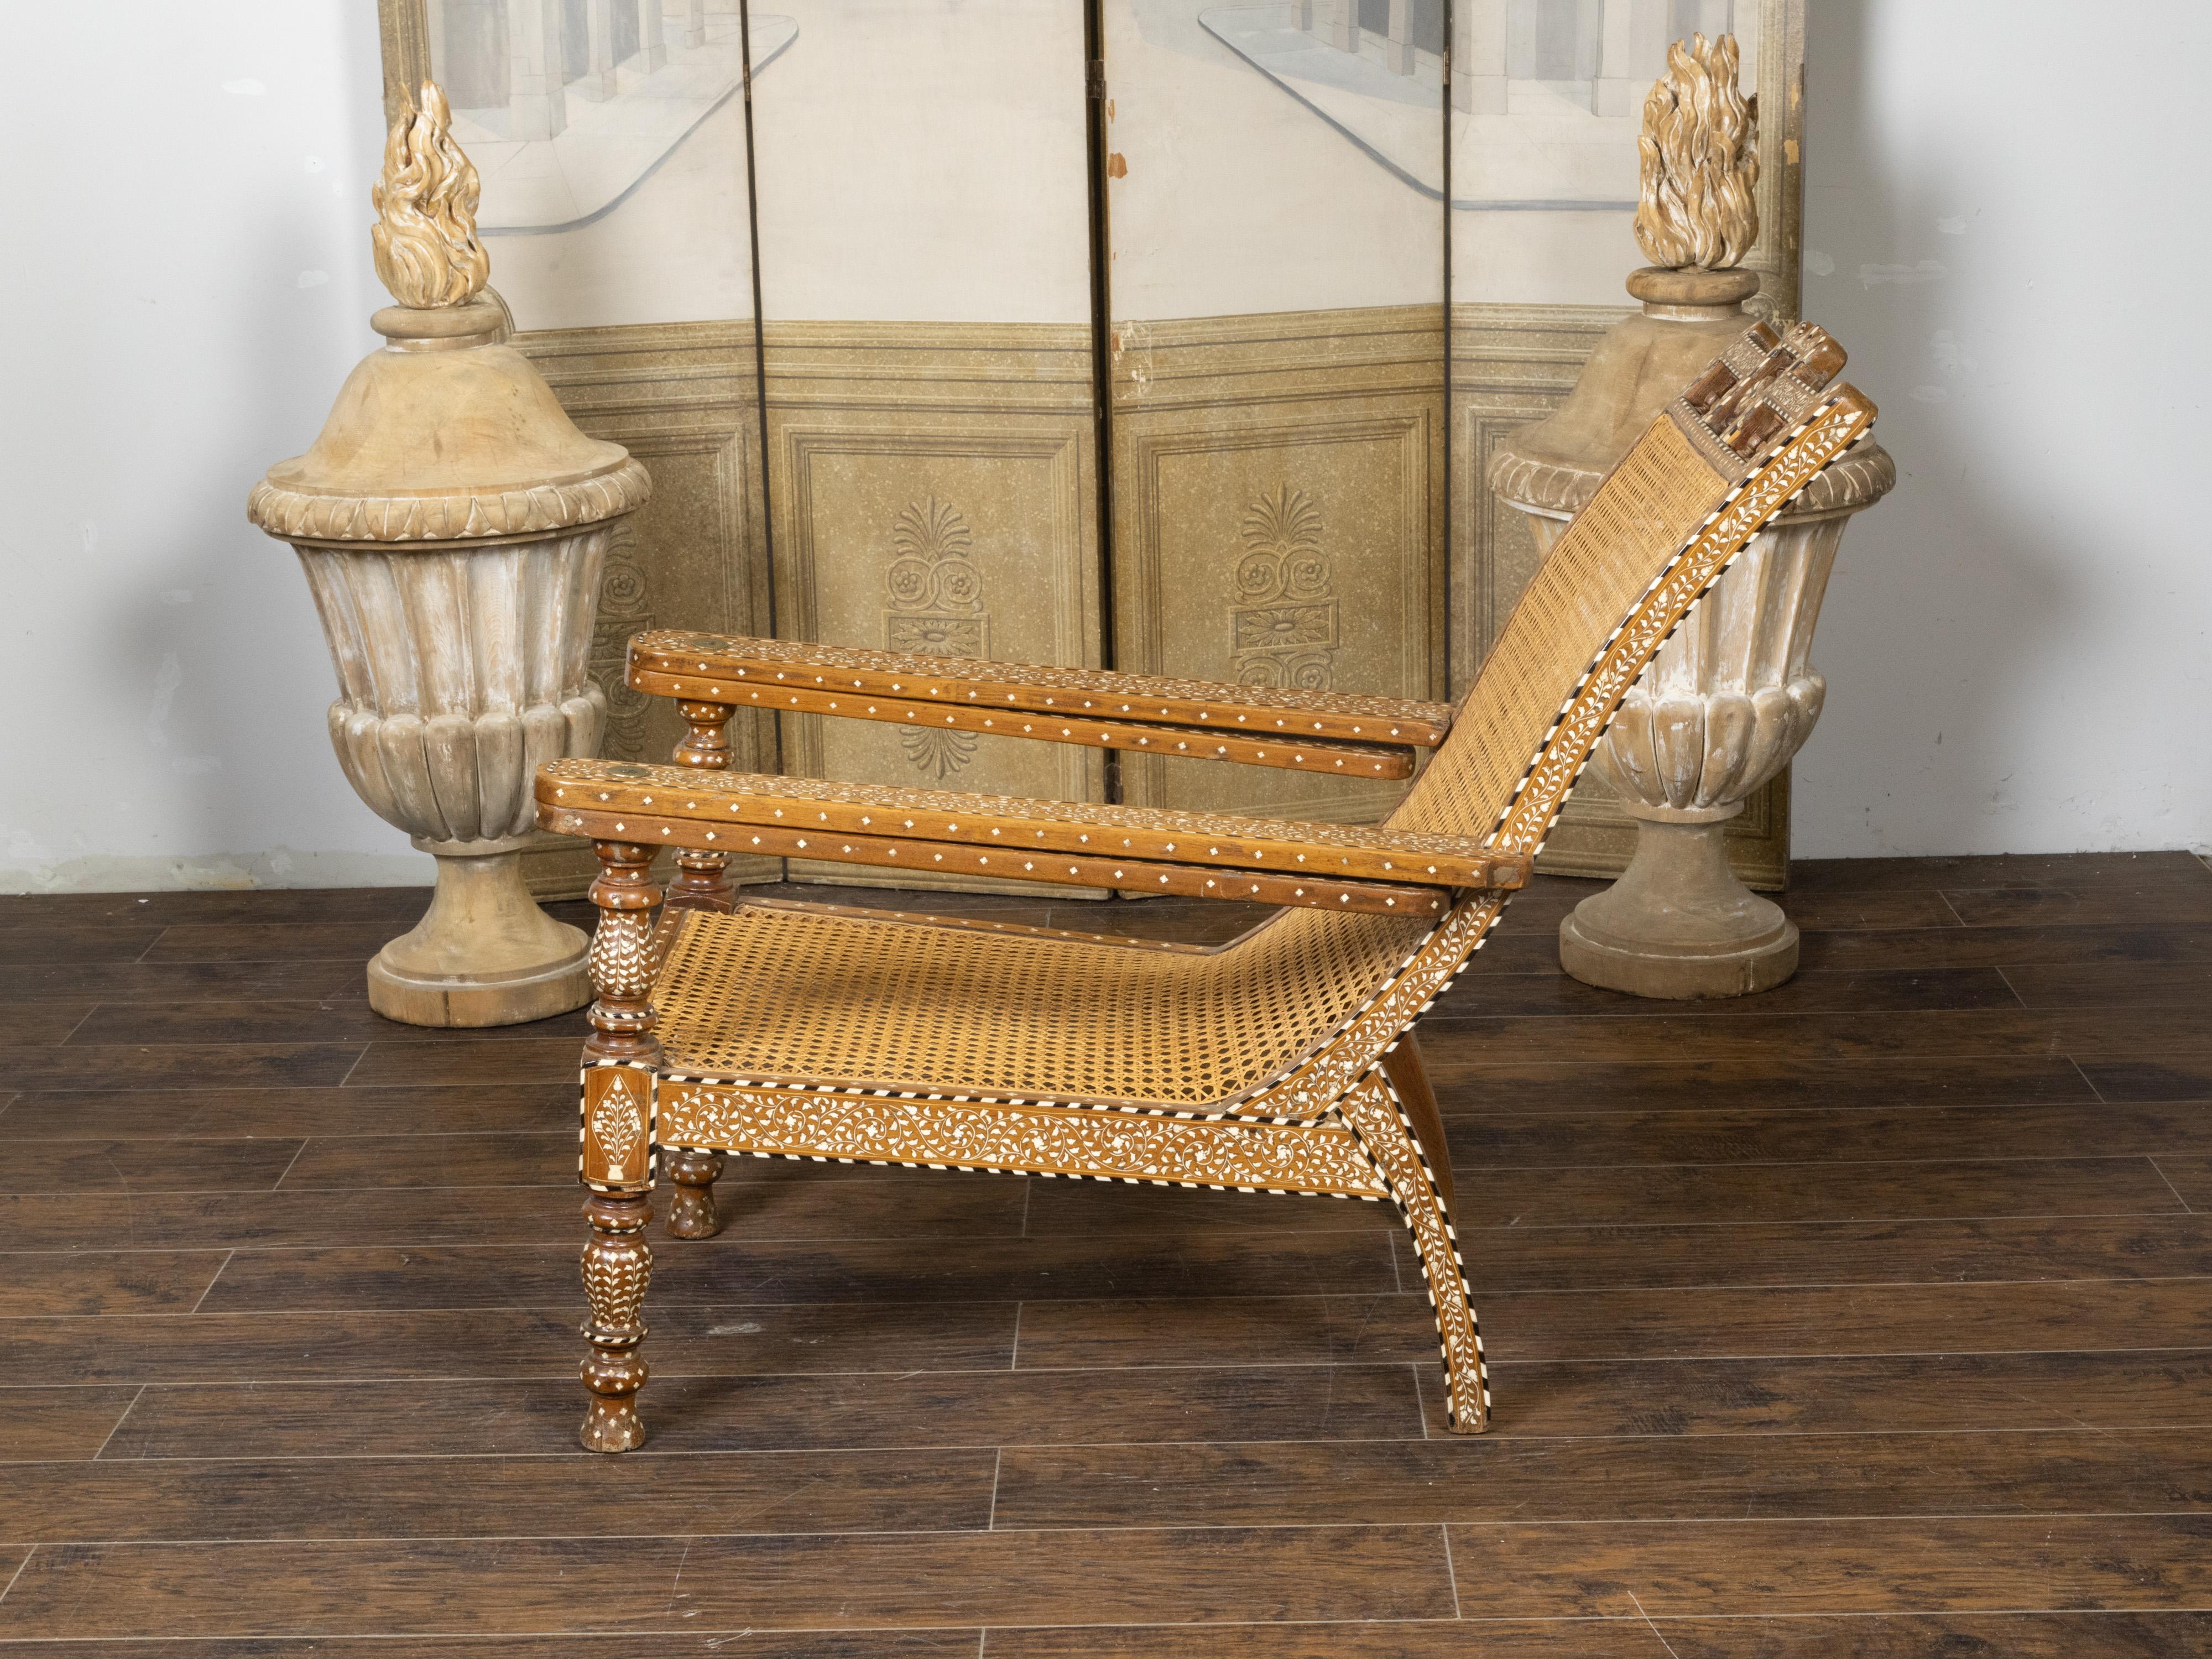 20th Century Anglo-Indian Inlaid Plantation Chair with Scrolling Foliage and Extending Arms For Sale